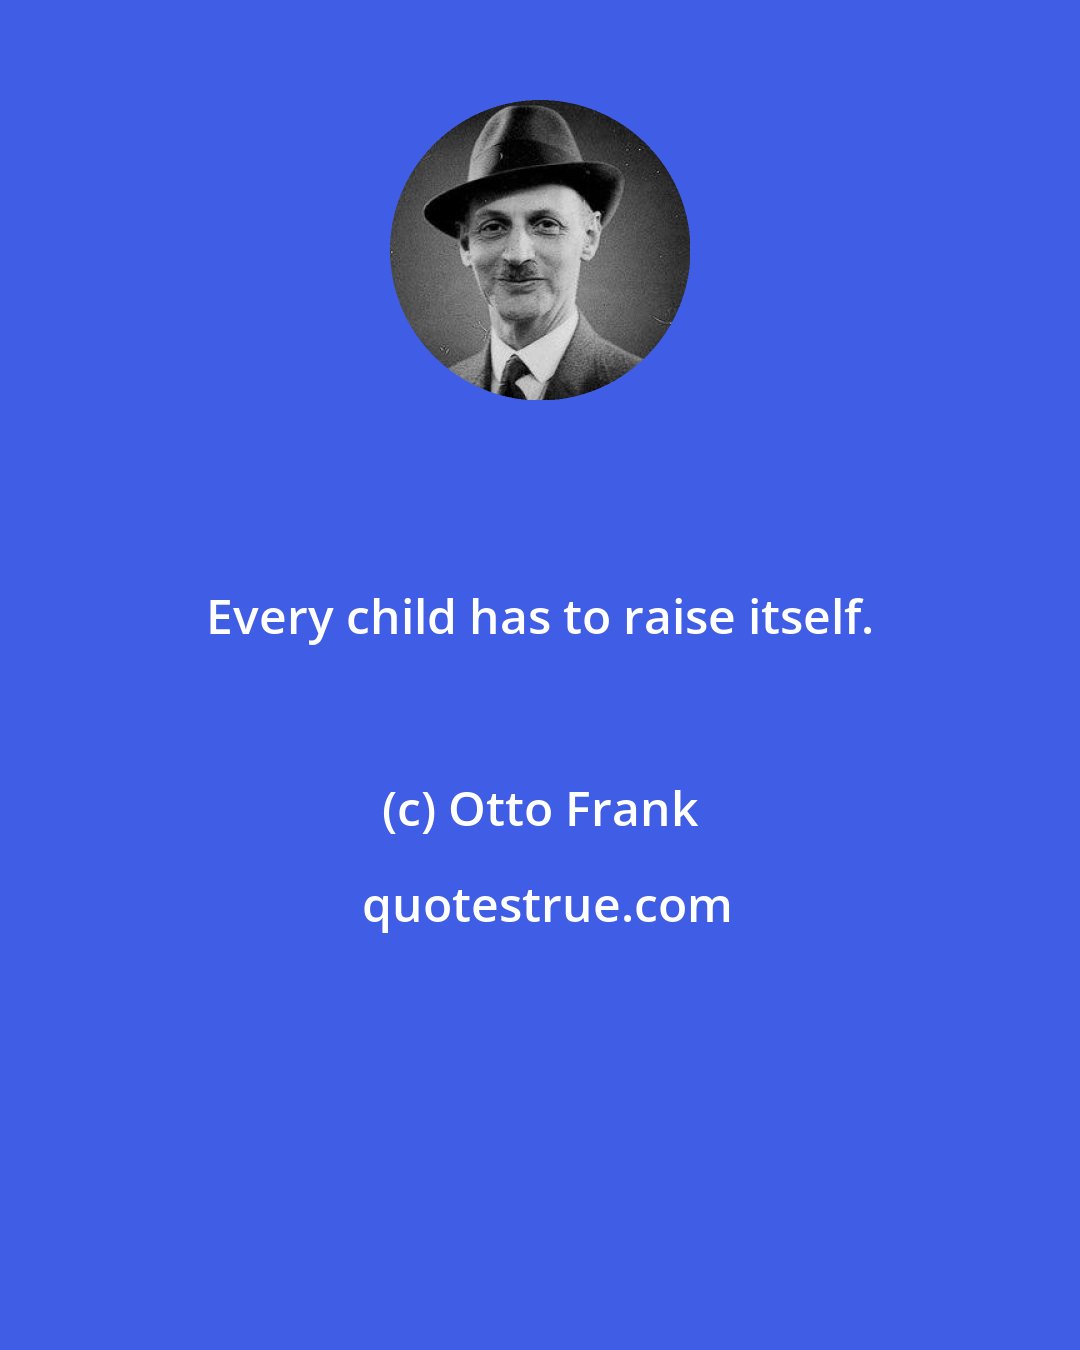 Otto Frank: Every child has to raise itself.